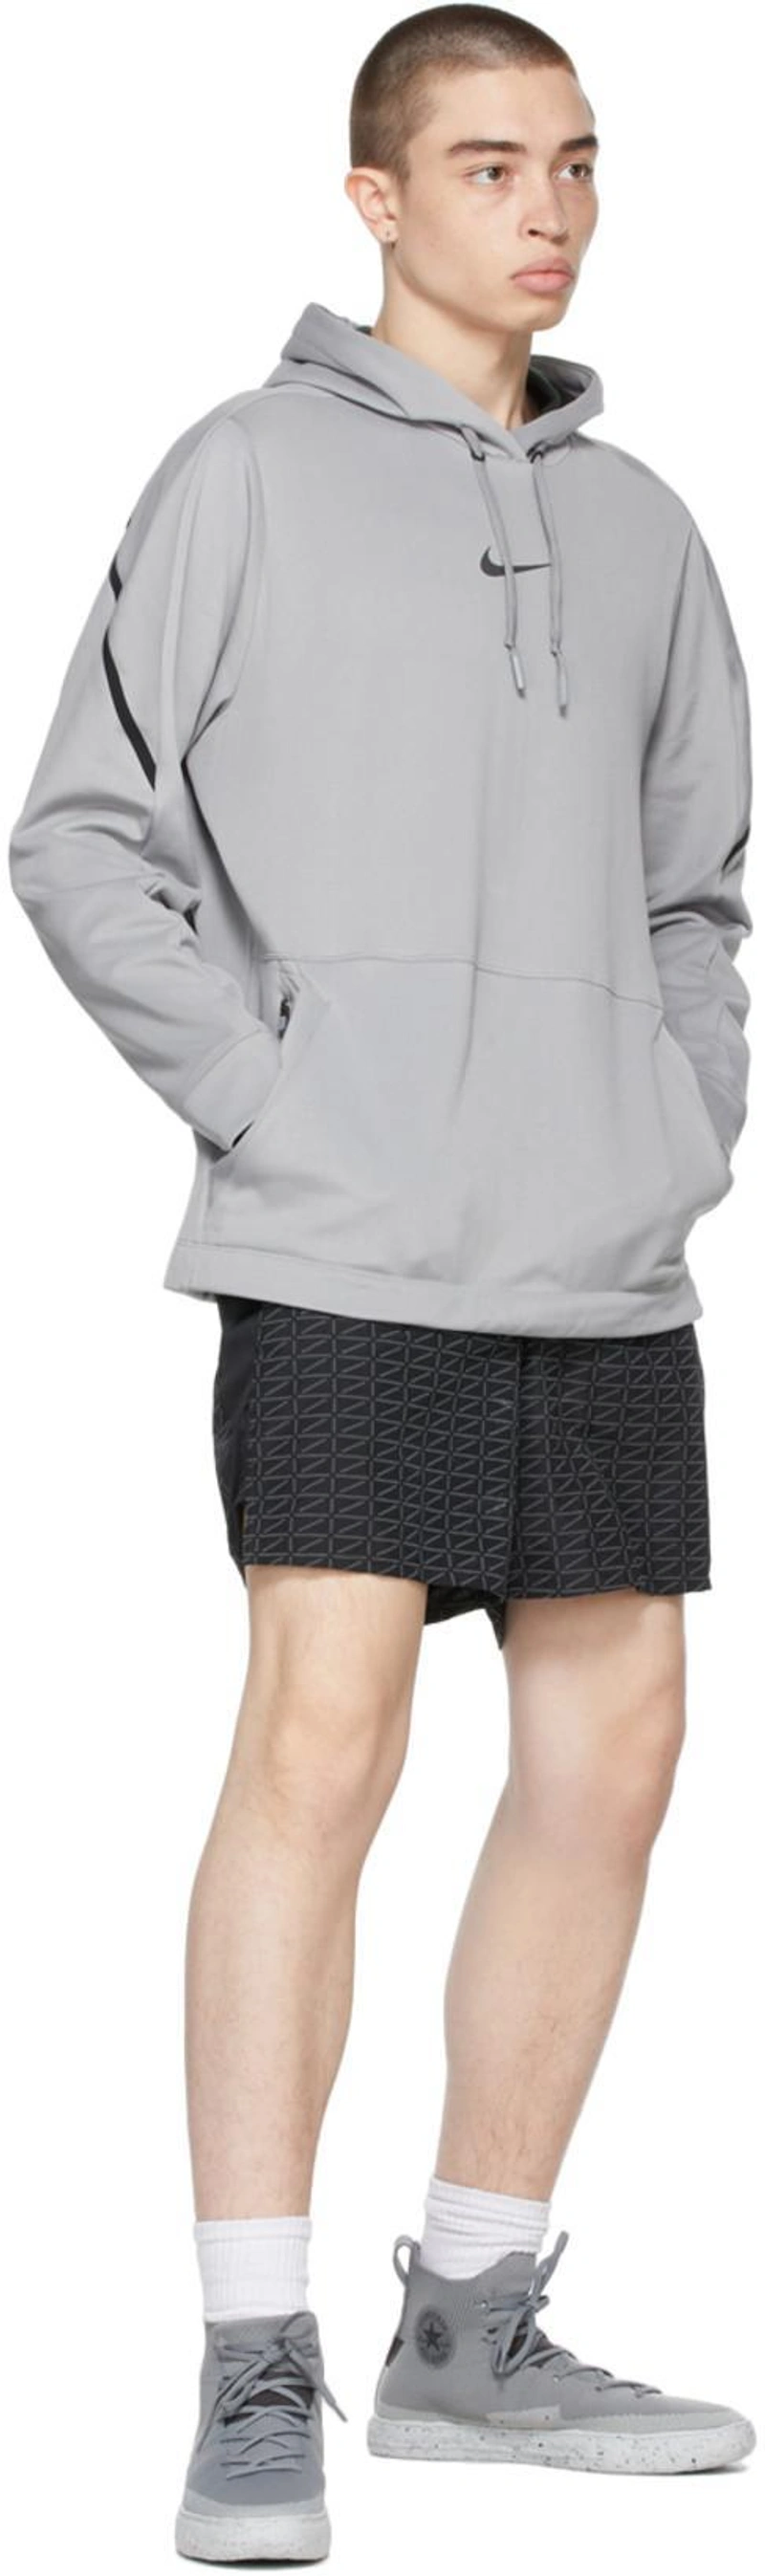 SSENSE's Post | Wearing: Nike Grey & Black Pro Pullover Hoodie In Particle Grey,black; Nike Black Run Logo Shorts In Black/white; Converse Grey Chuck Taylor All Star Crater Knit High Trainers In Hi Limestone Grey